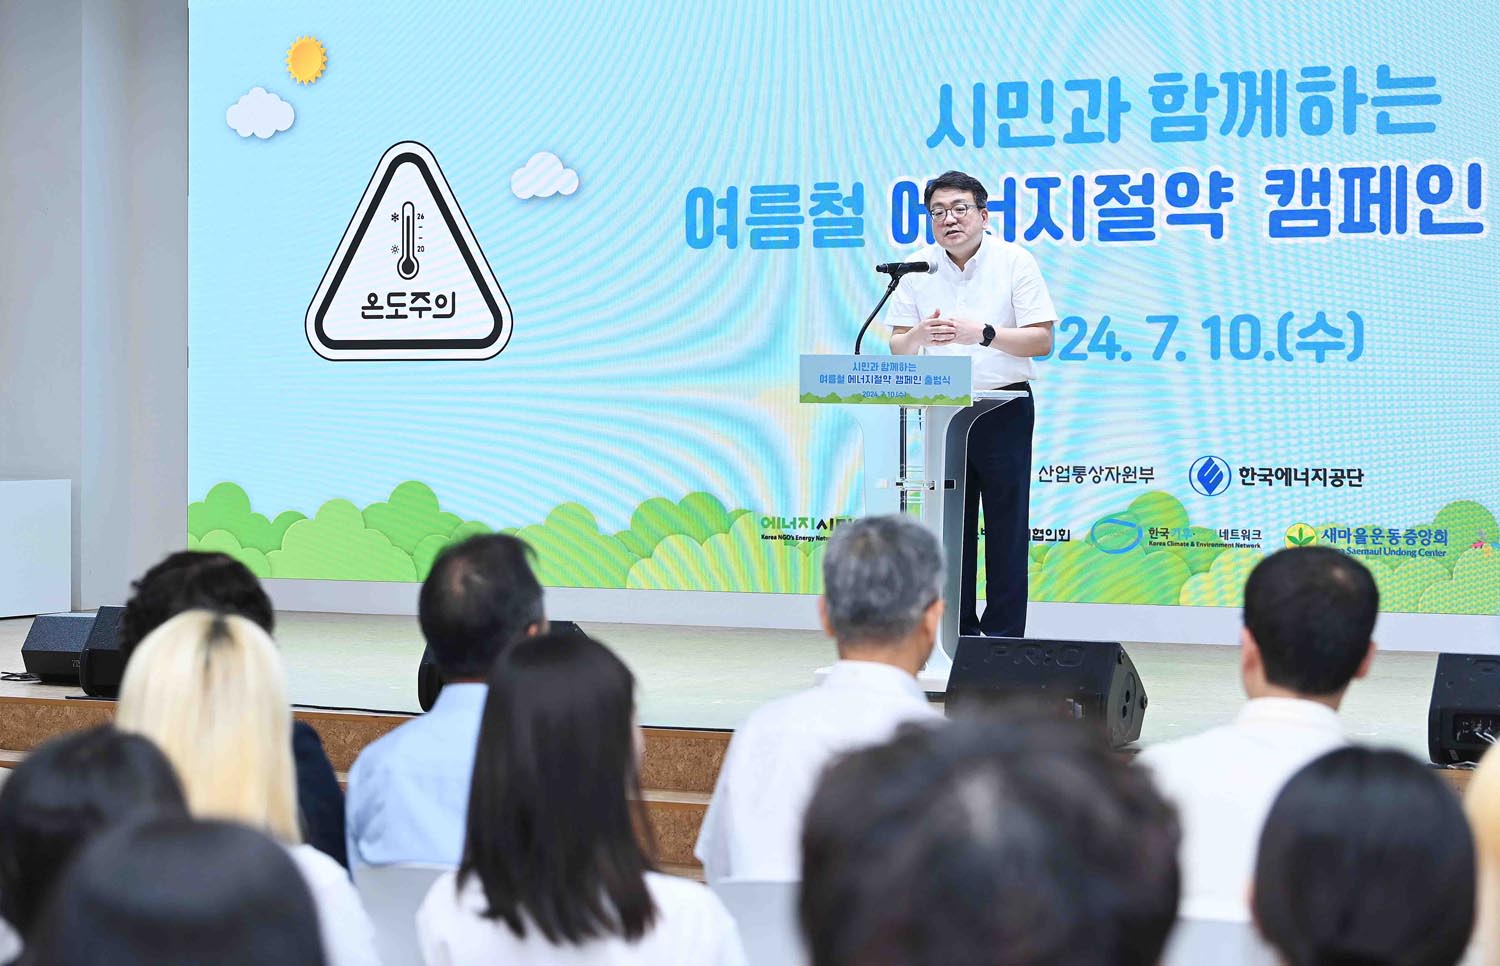 Vice Minister speaks at Summertime Energy Saving Campaign